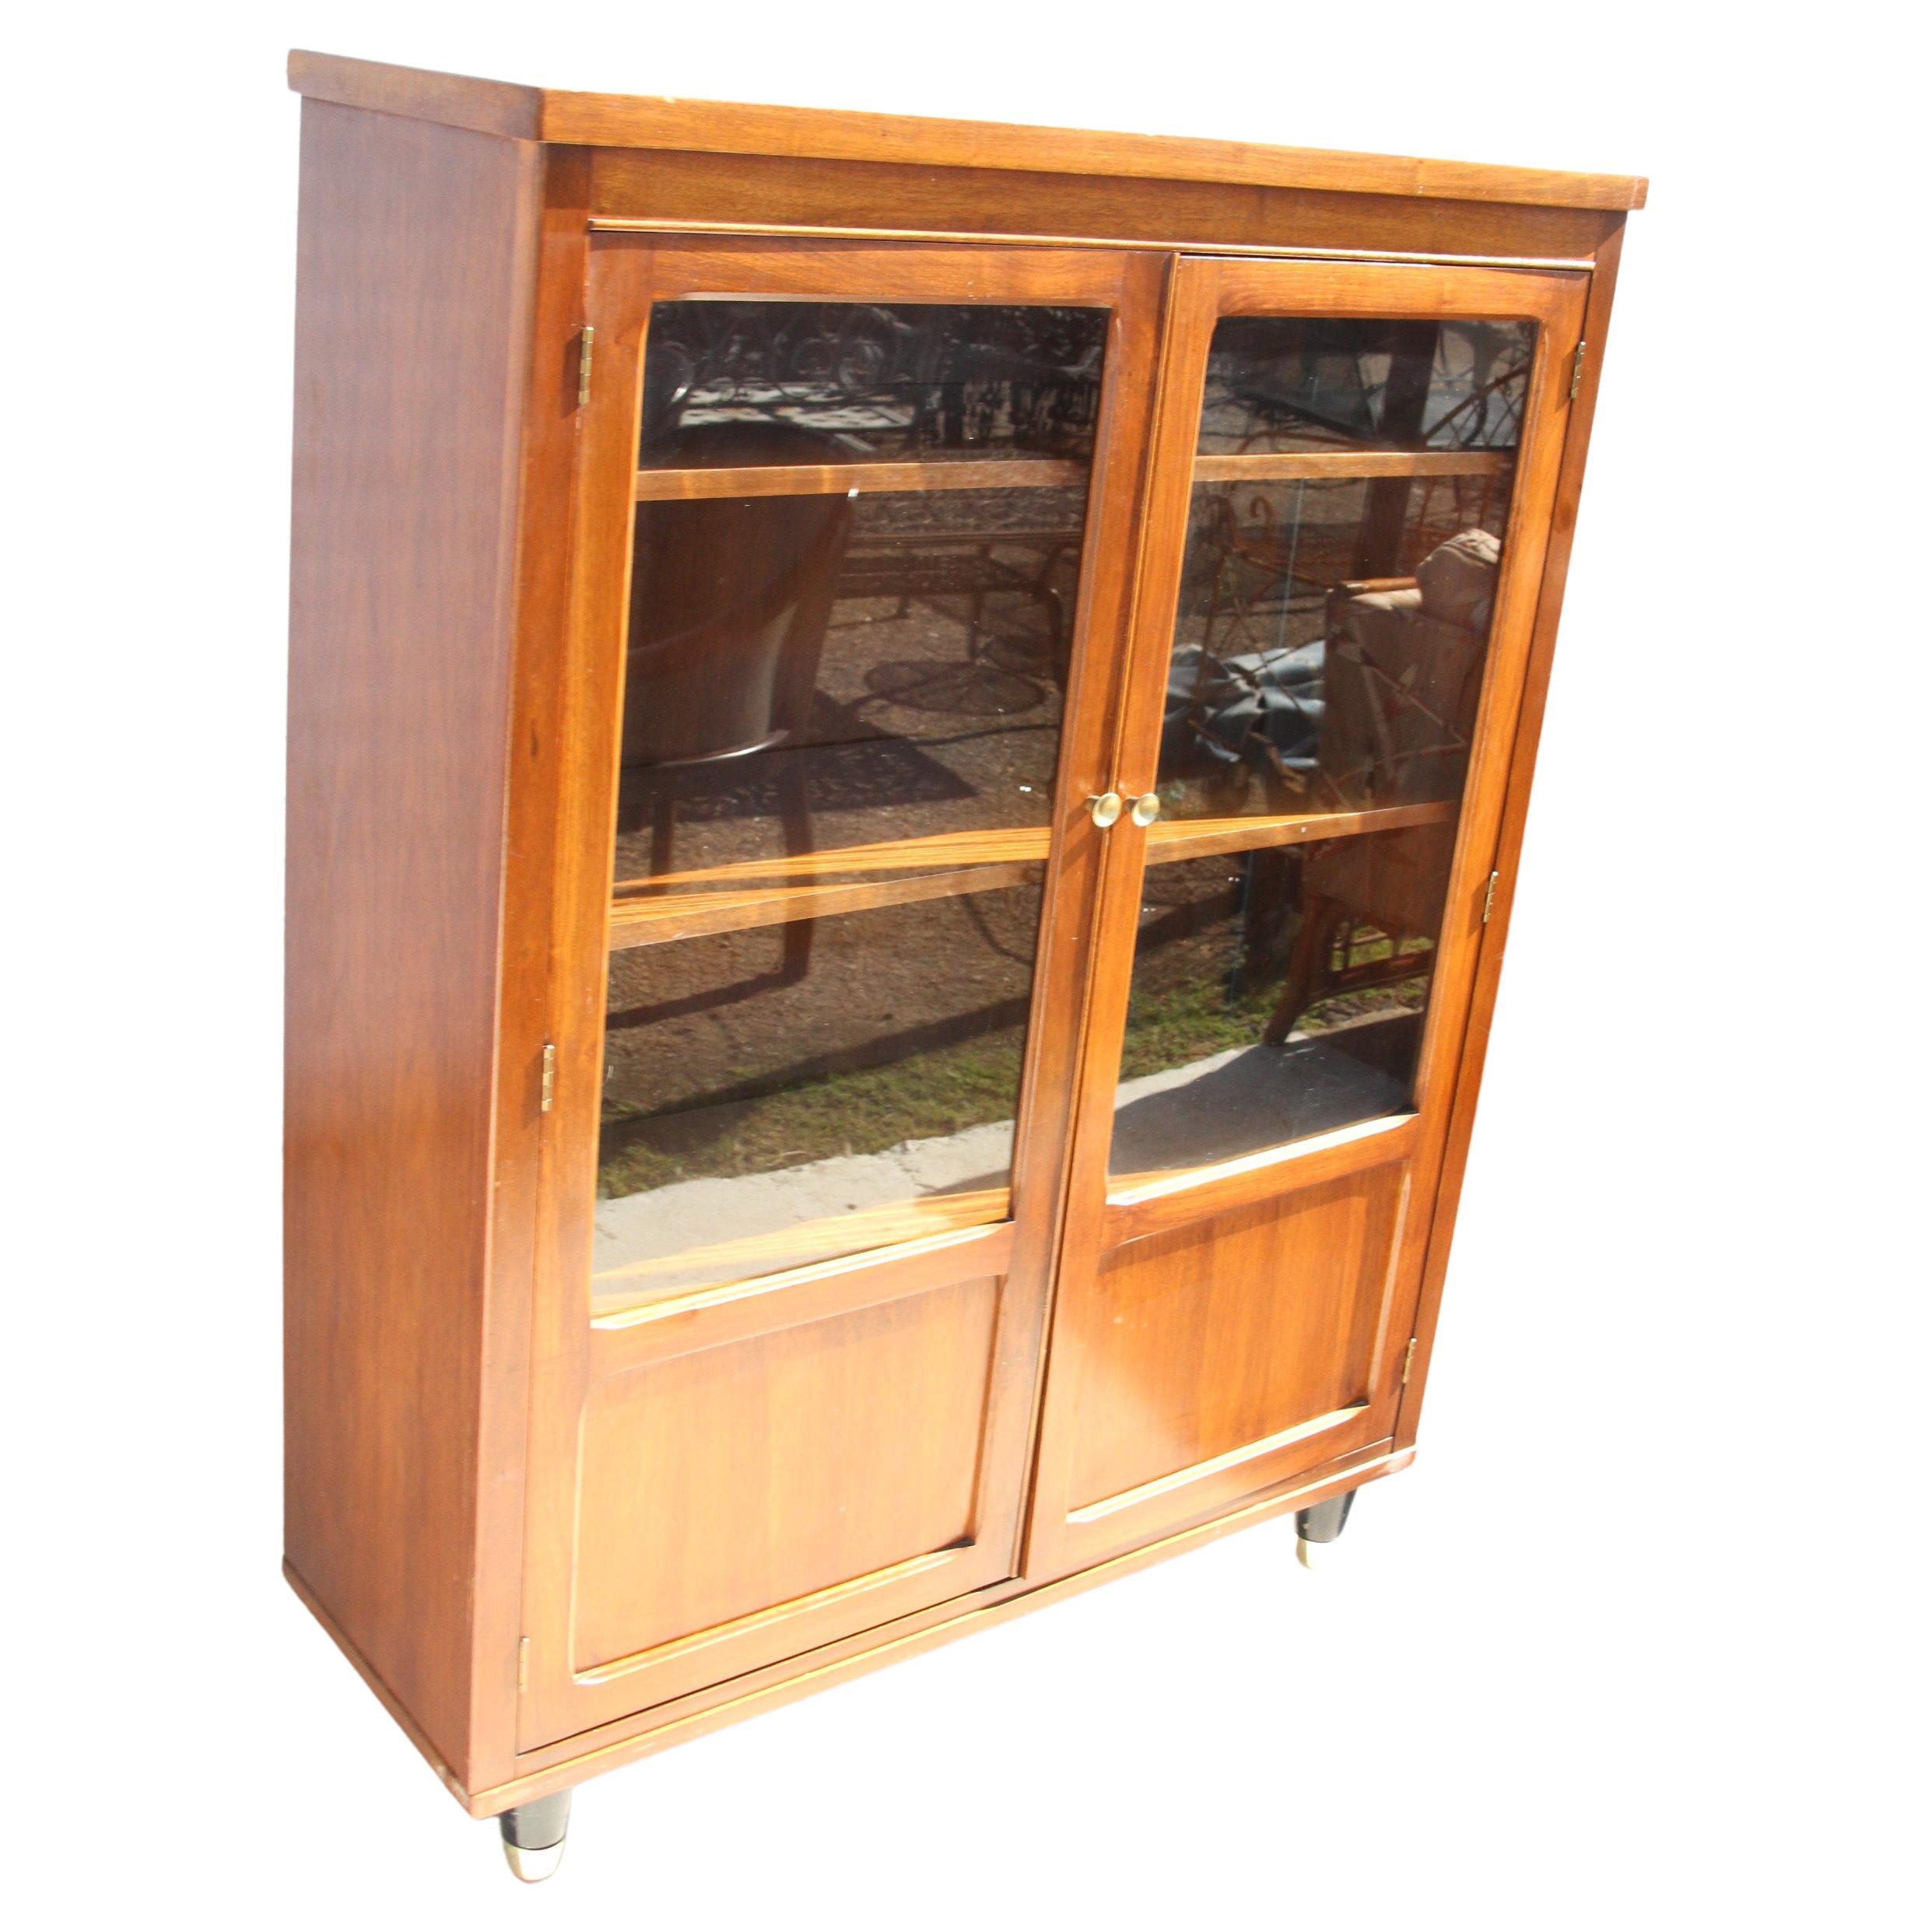 Midcentury Walnut Bookcase

Perfect for china, glass, bottles, books, etc. 
The cabinet has three shelves that can be placed in different positions 

The doors have integrated handles and the cabinet stands on tapered legs with brass caps.